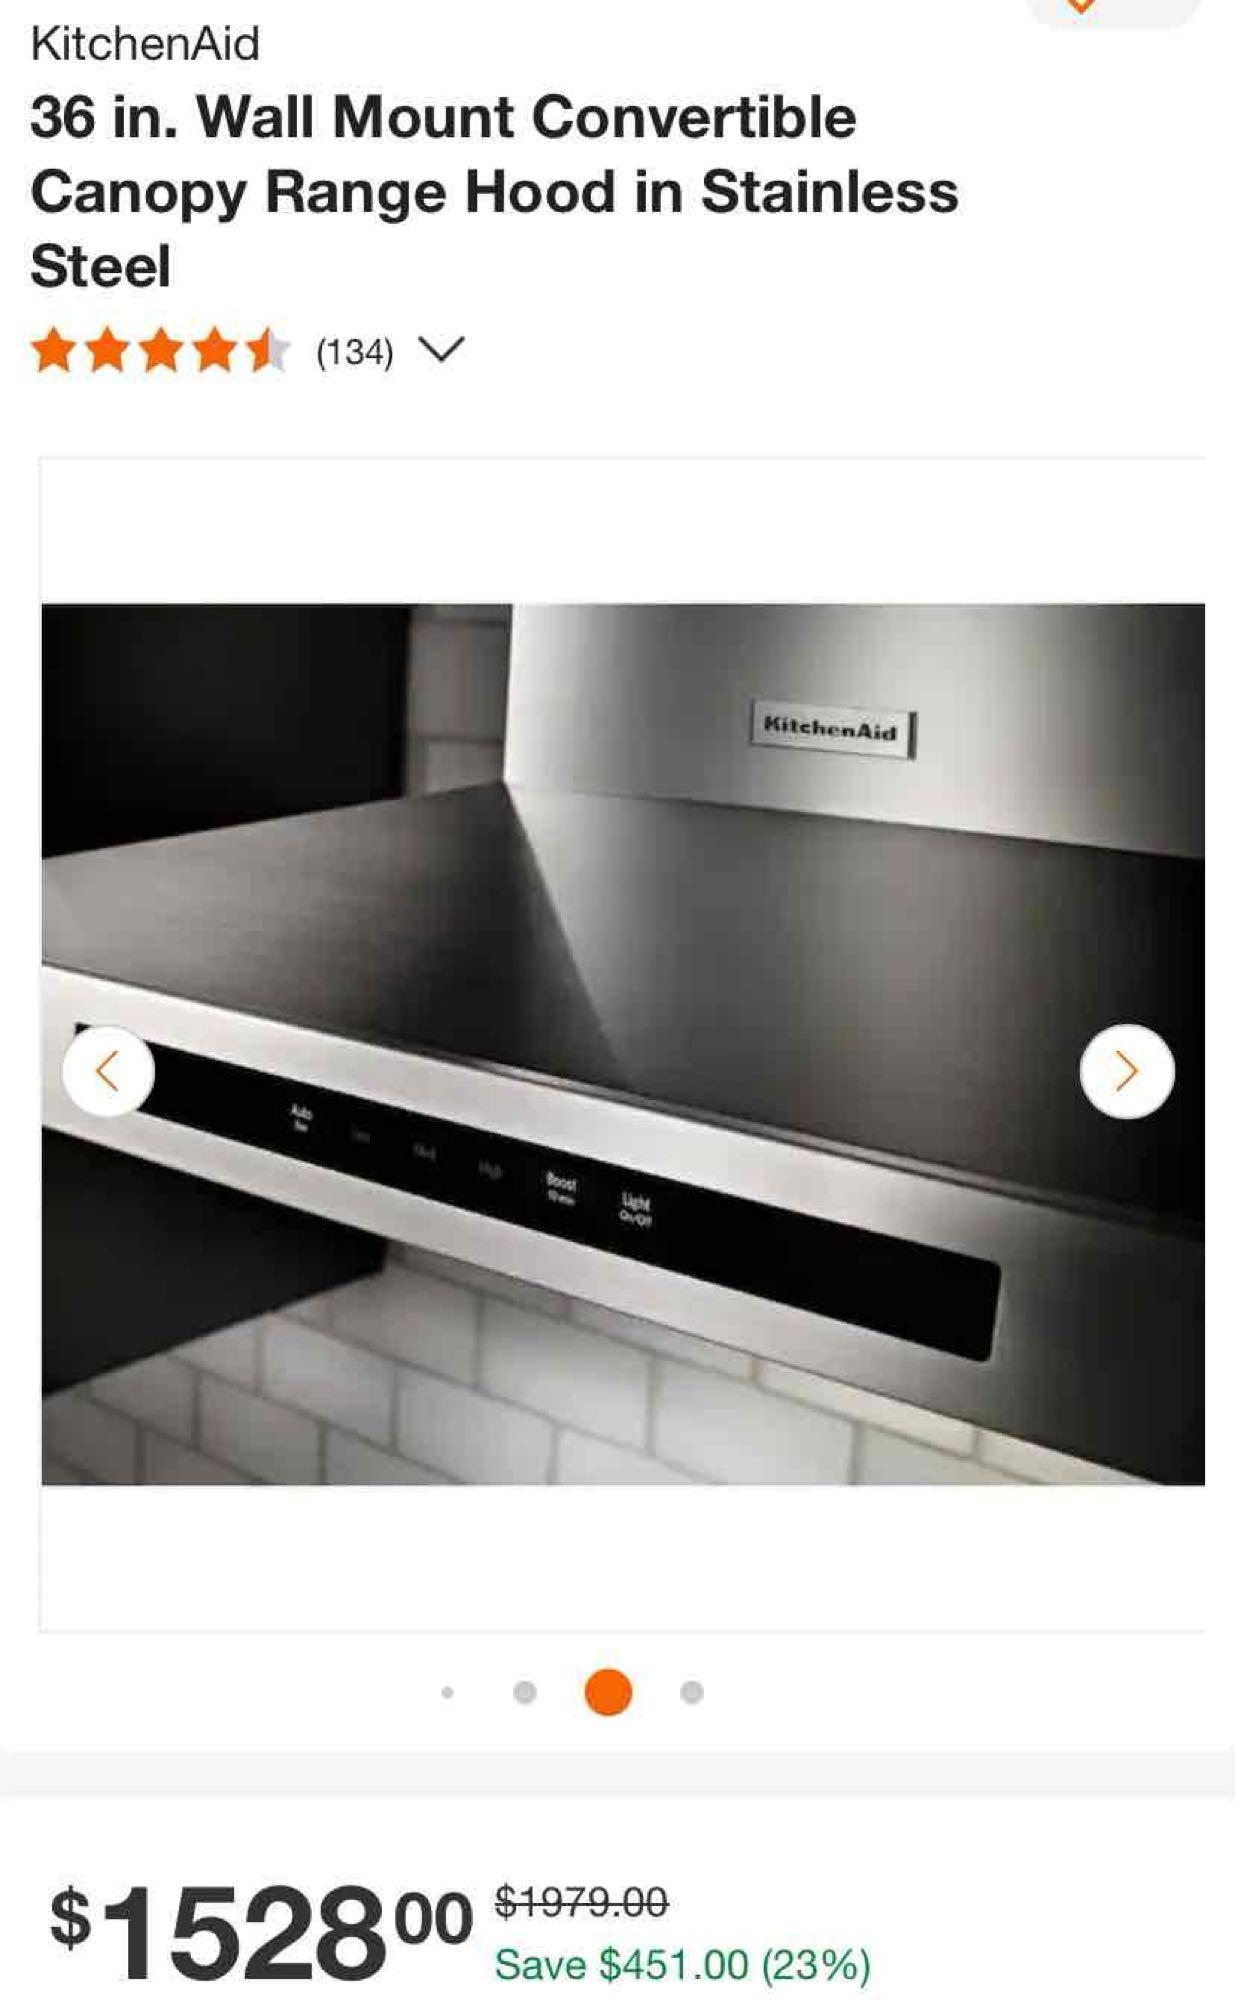 KitchenAid 36 in. Wall Mount Convertible Canopy Range Hood in Stainless Steel